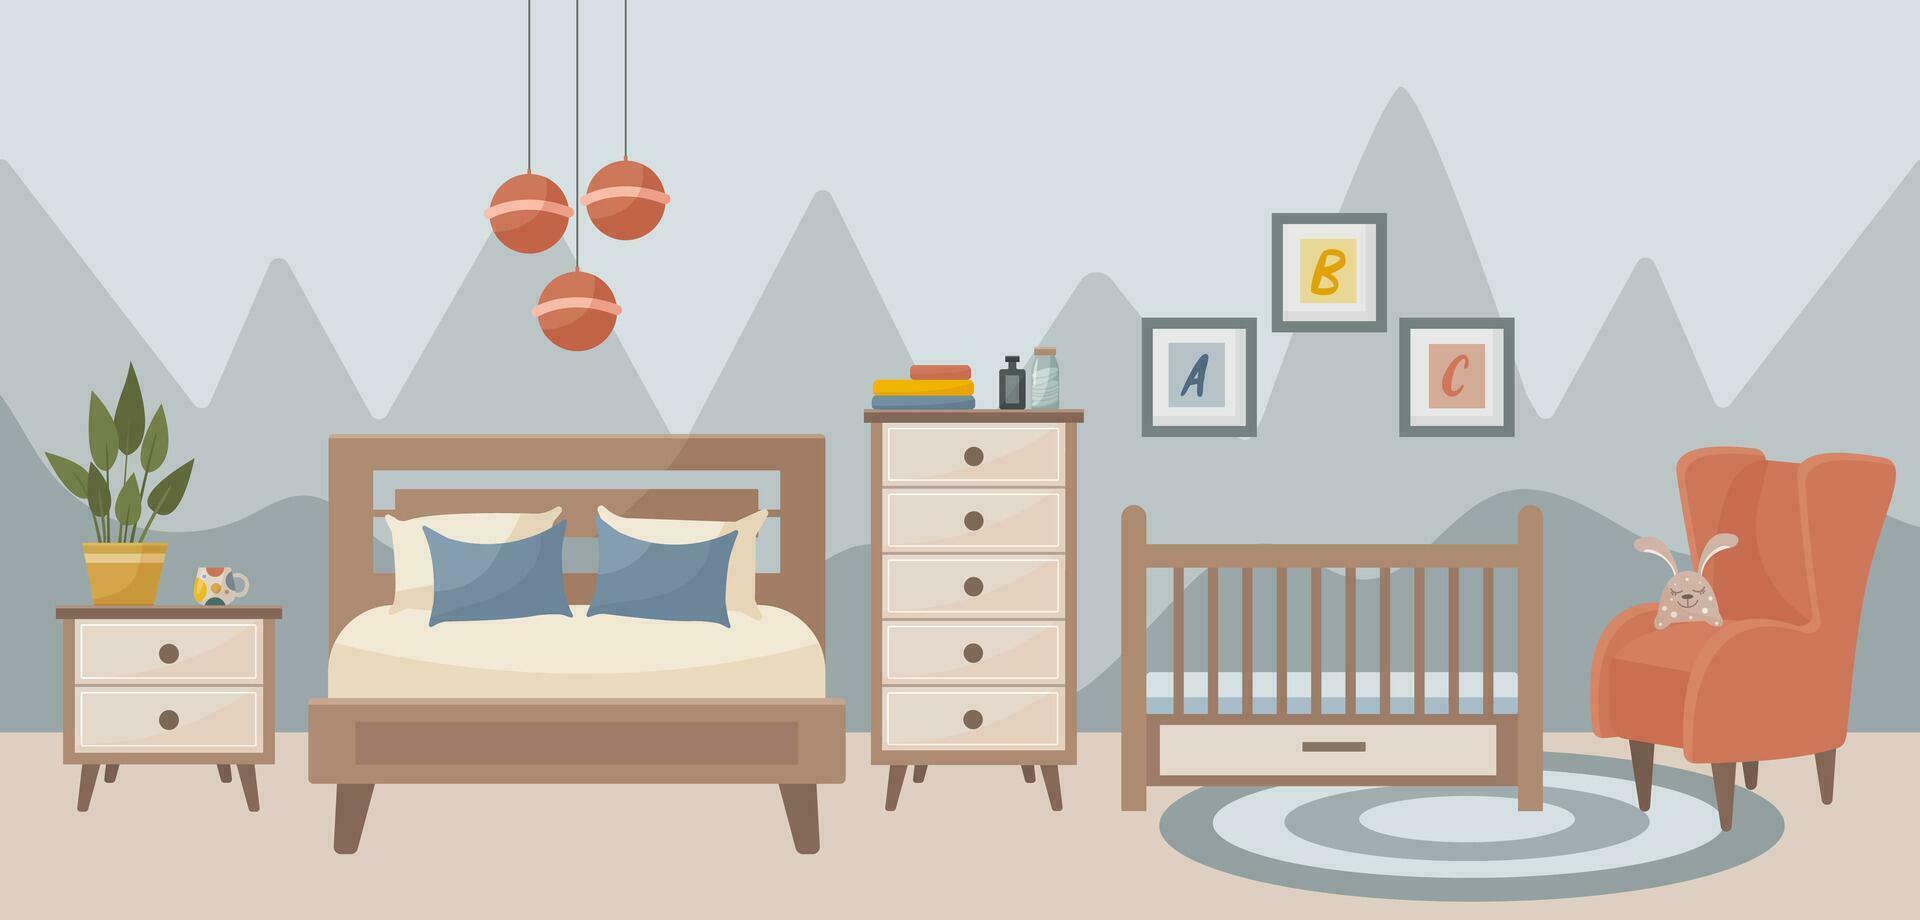 Cozy bedroom with a children's bed. Bedroom interior bed, carpet, lamp, crib, potted plants, paintings, armchair, bedside table. Interior concept. Vector flat illustration.